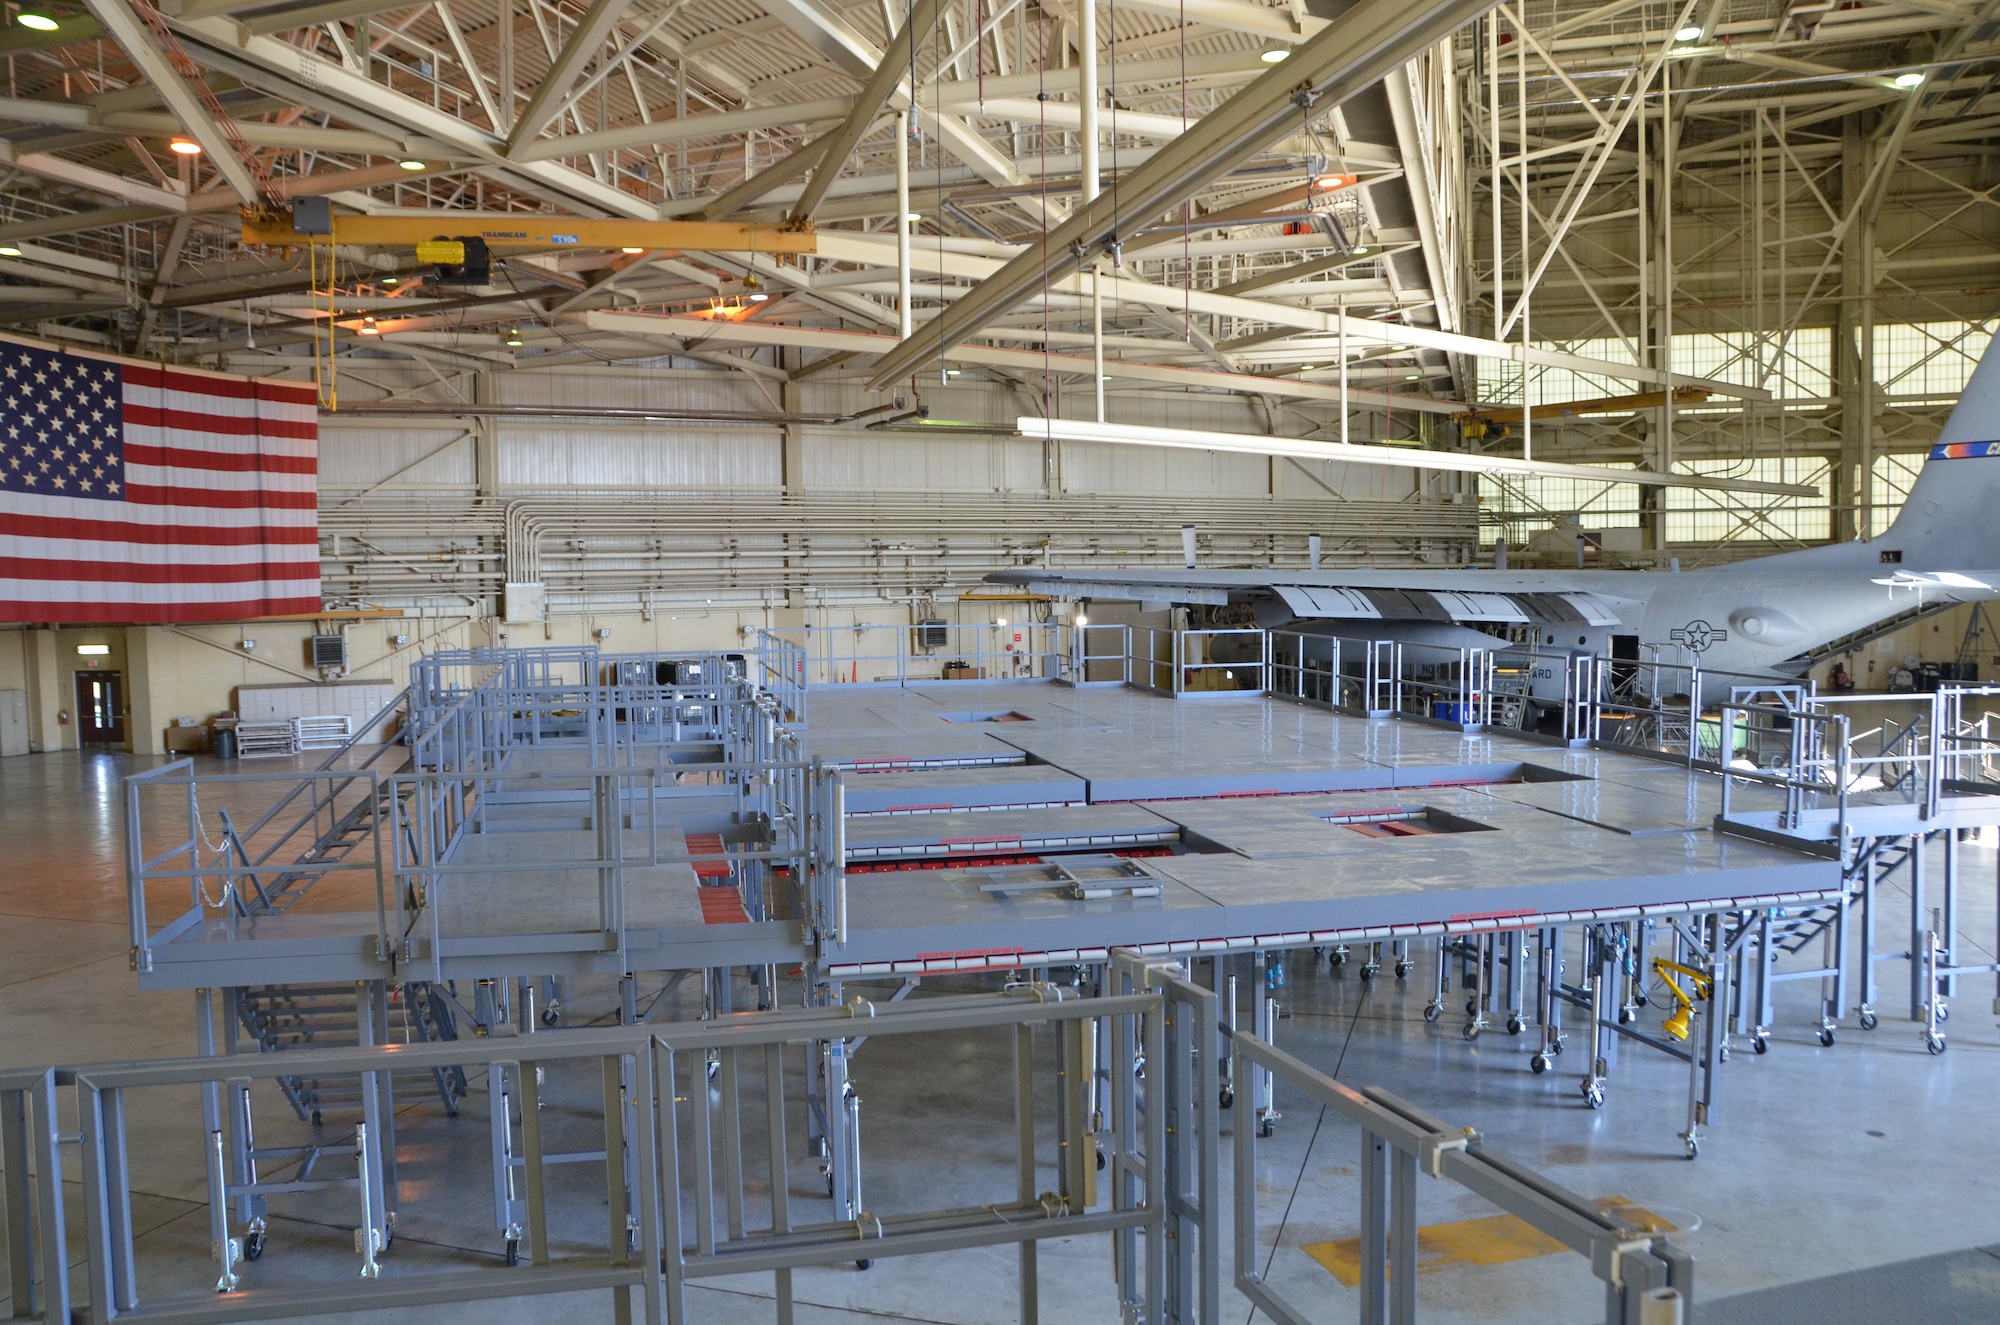 The long awaited Isochronal Inspection (ISO) Aircraft Maintenance Platforms are prepositioned during assembly in a hanger at the 145th Maintenance Squadron, North Carolina Air National Guard Base, Charlotte Douglas International Airport; May 30, 2015. The new ISO stands provide maintainers quicker and safer access to all areas of the C-130 aircraft compared to the old stands. The huge surface area provides many options for maintainers to move and position themselves where they need to be. (U.S. Air National Guard photo by Master Sgt. Patricia F. Moran, 145th Public Affairs/Released)